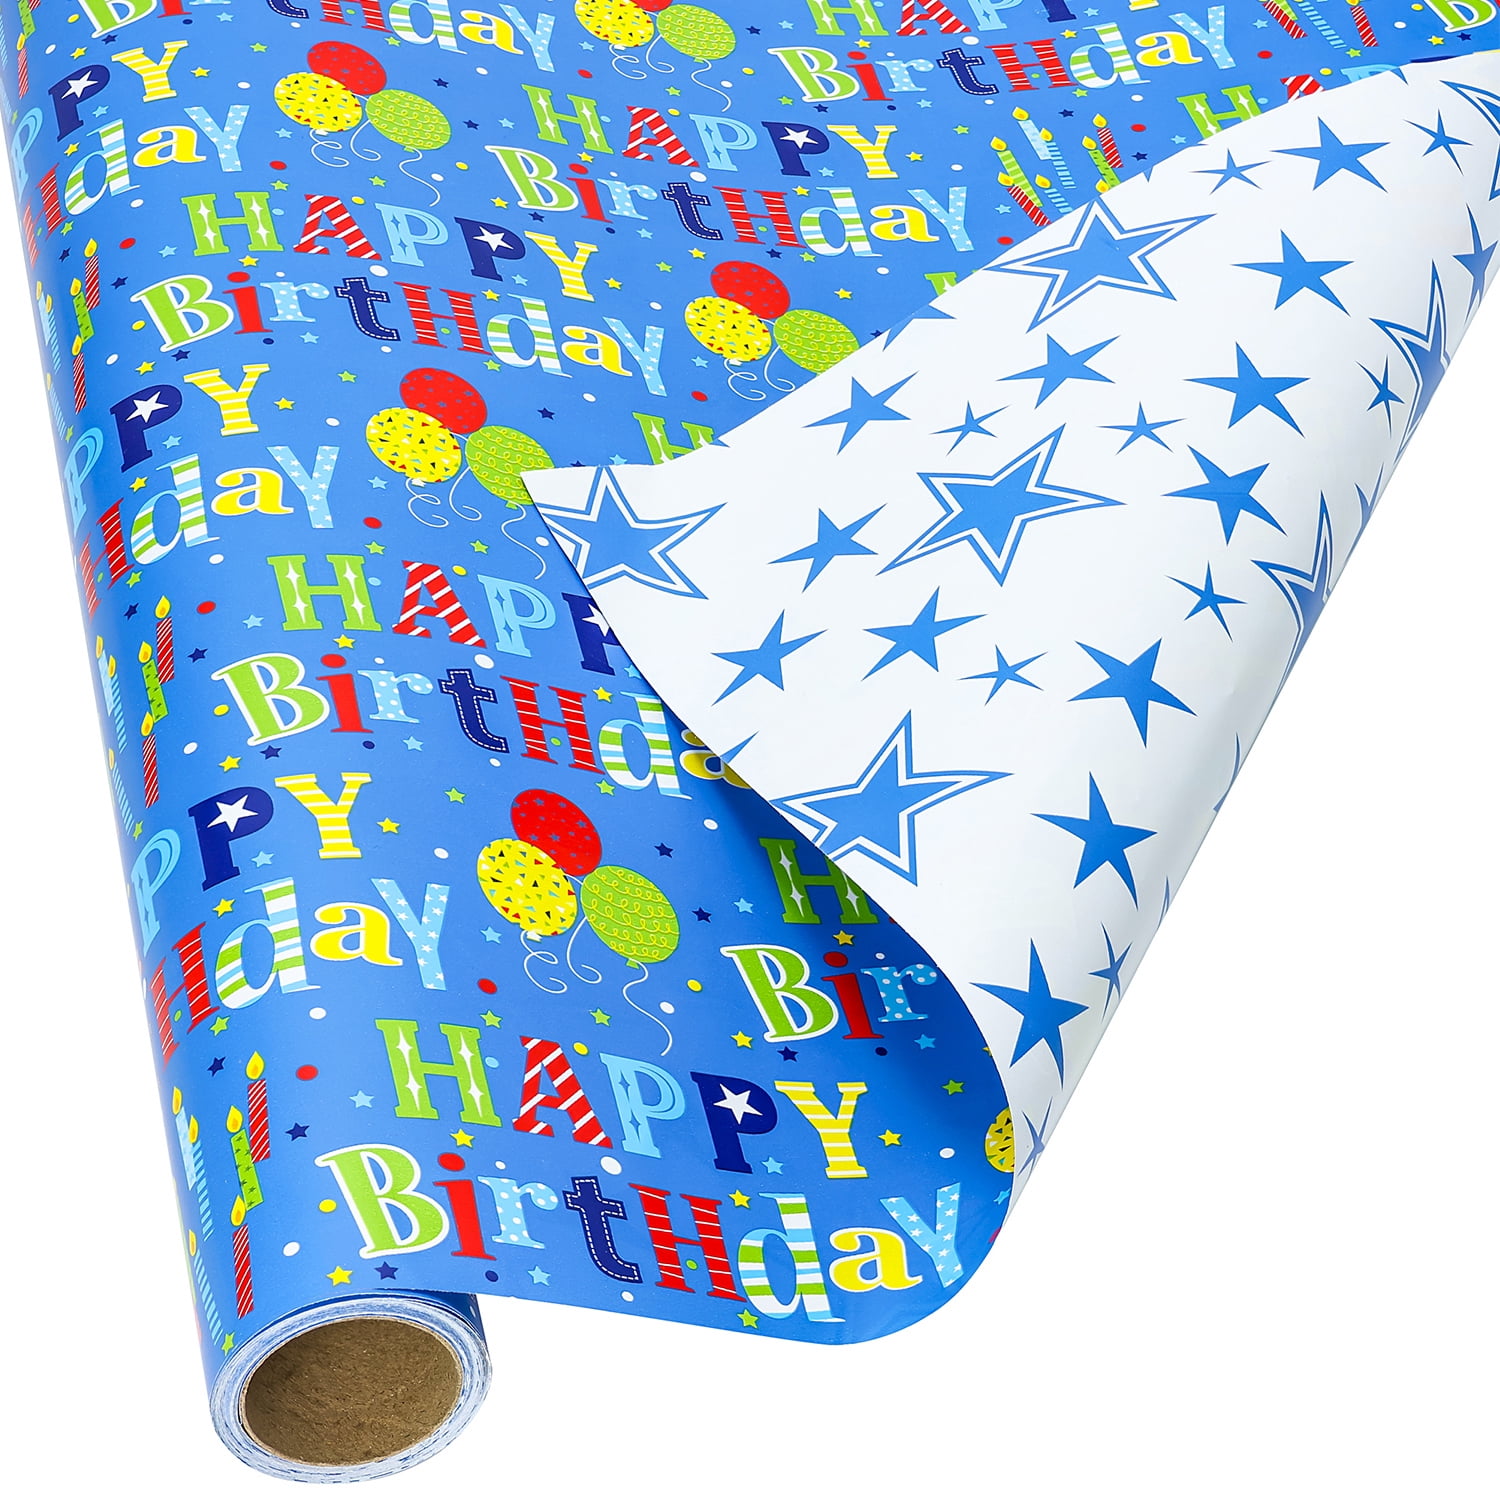 NAS 1 Pack, Happy Birthday Bash Wrapping Paper 24 inchx85' Cutter Roll for Party, Holiday & Events, Made in USA